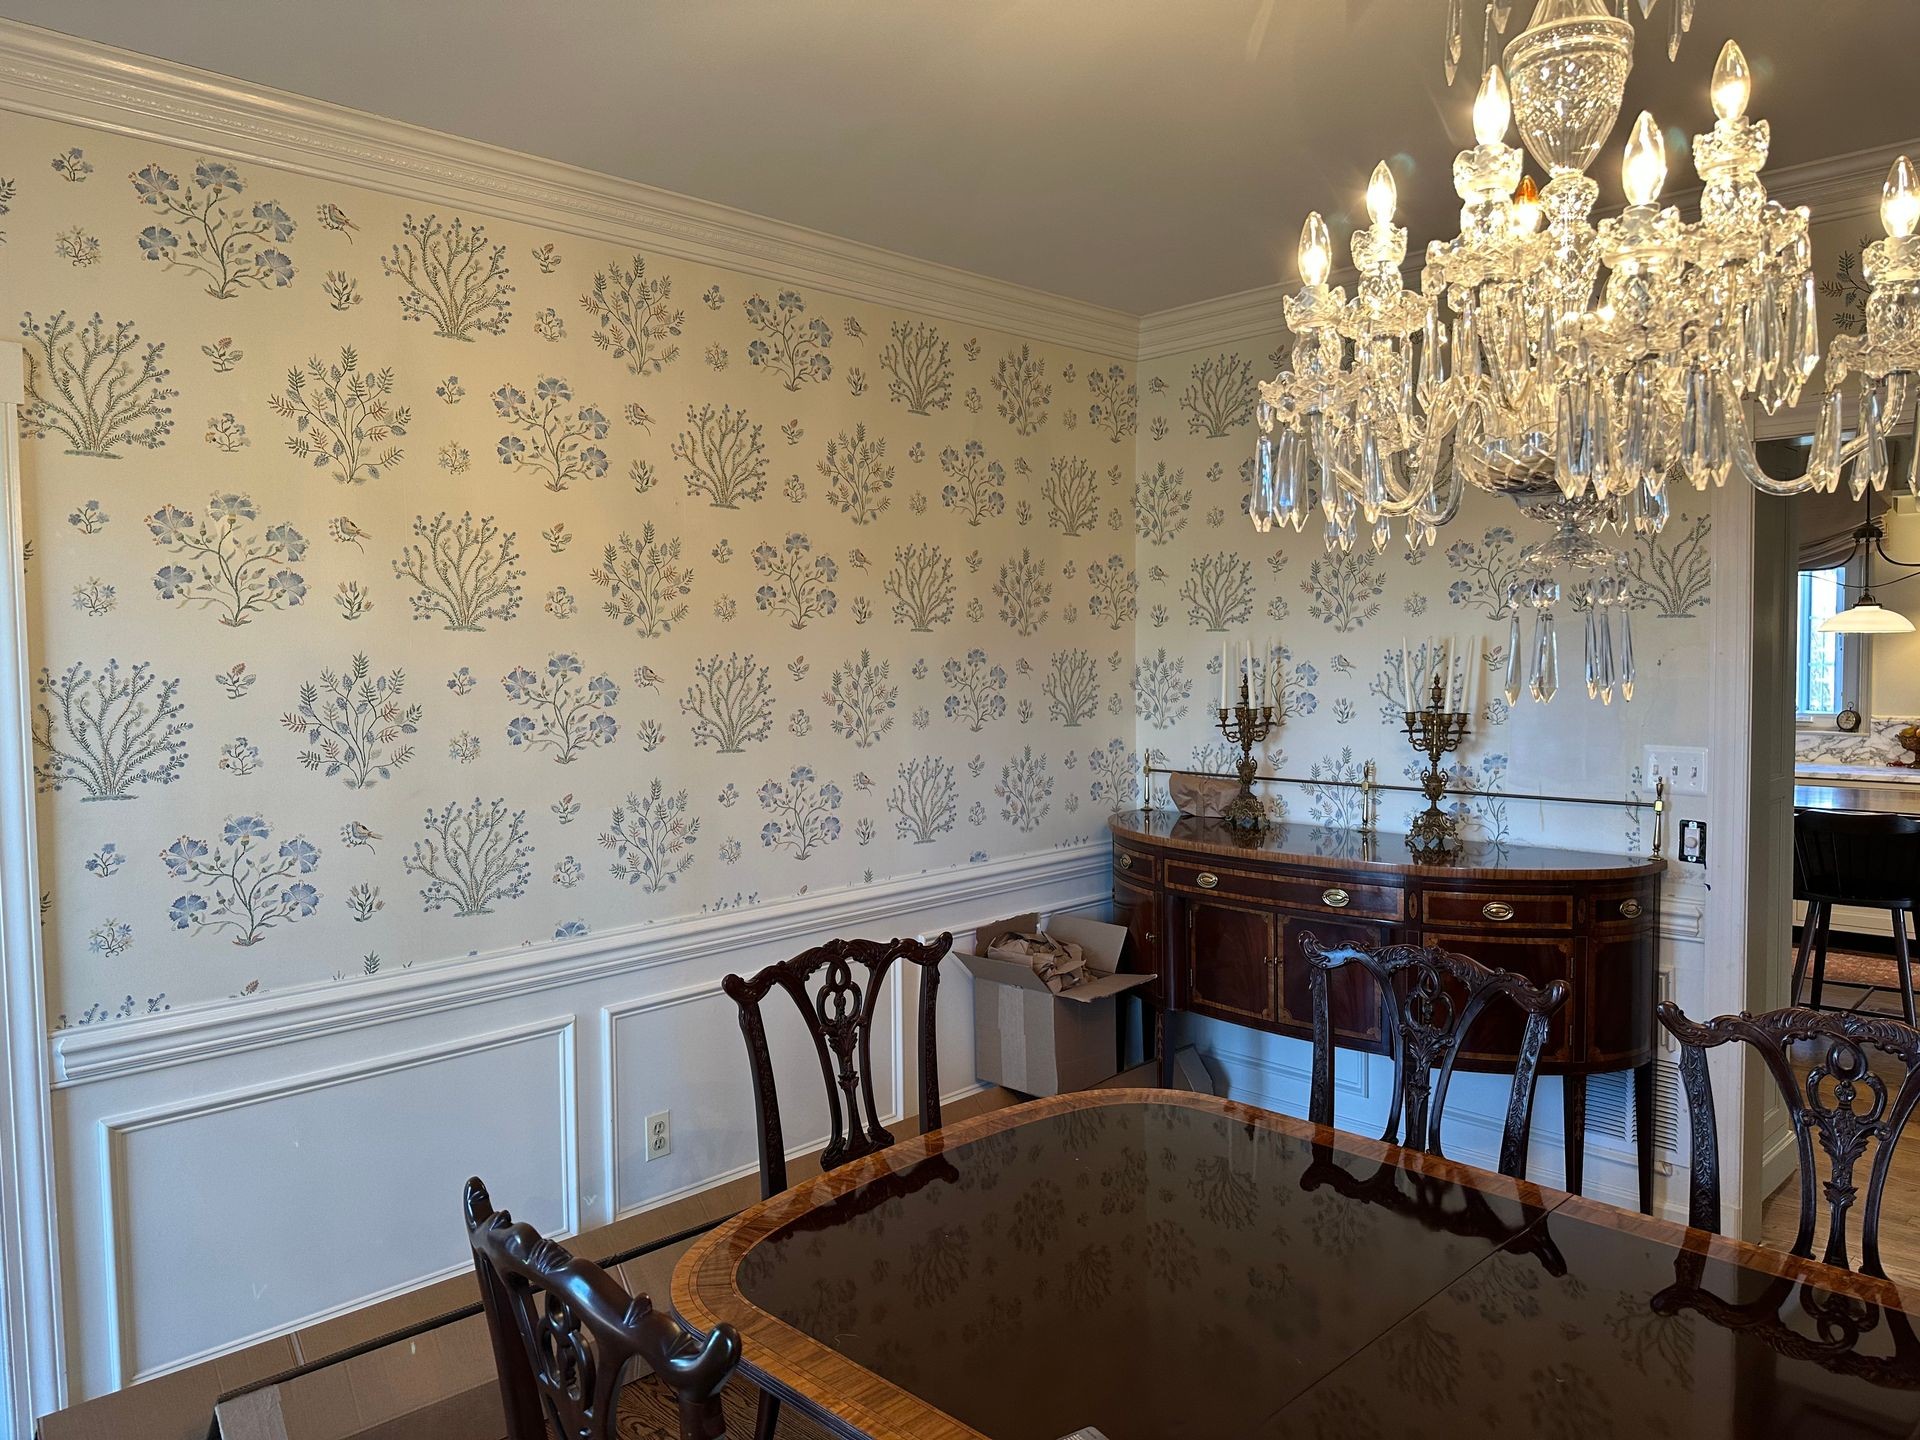 Wallpaper removal in Harford and Baltimore County. Living room, dining room or bedrooms. 